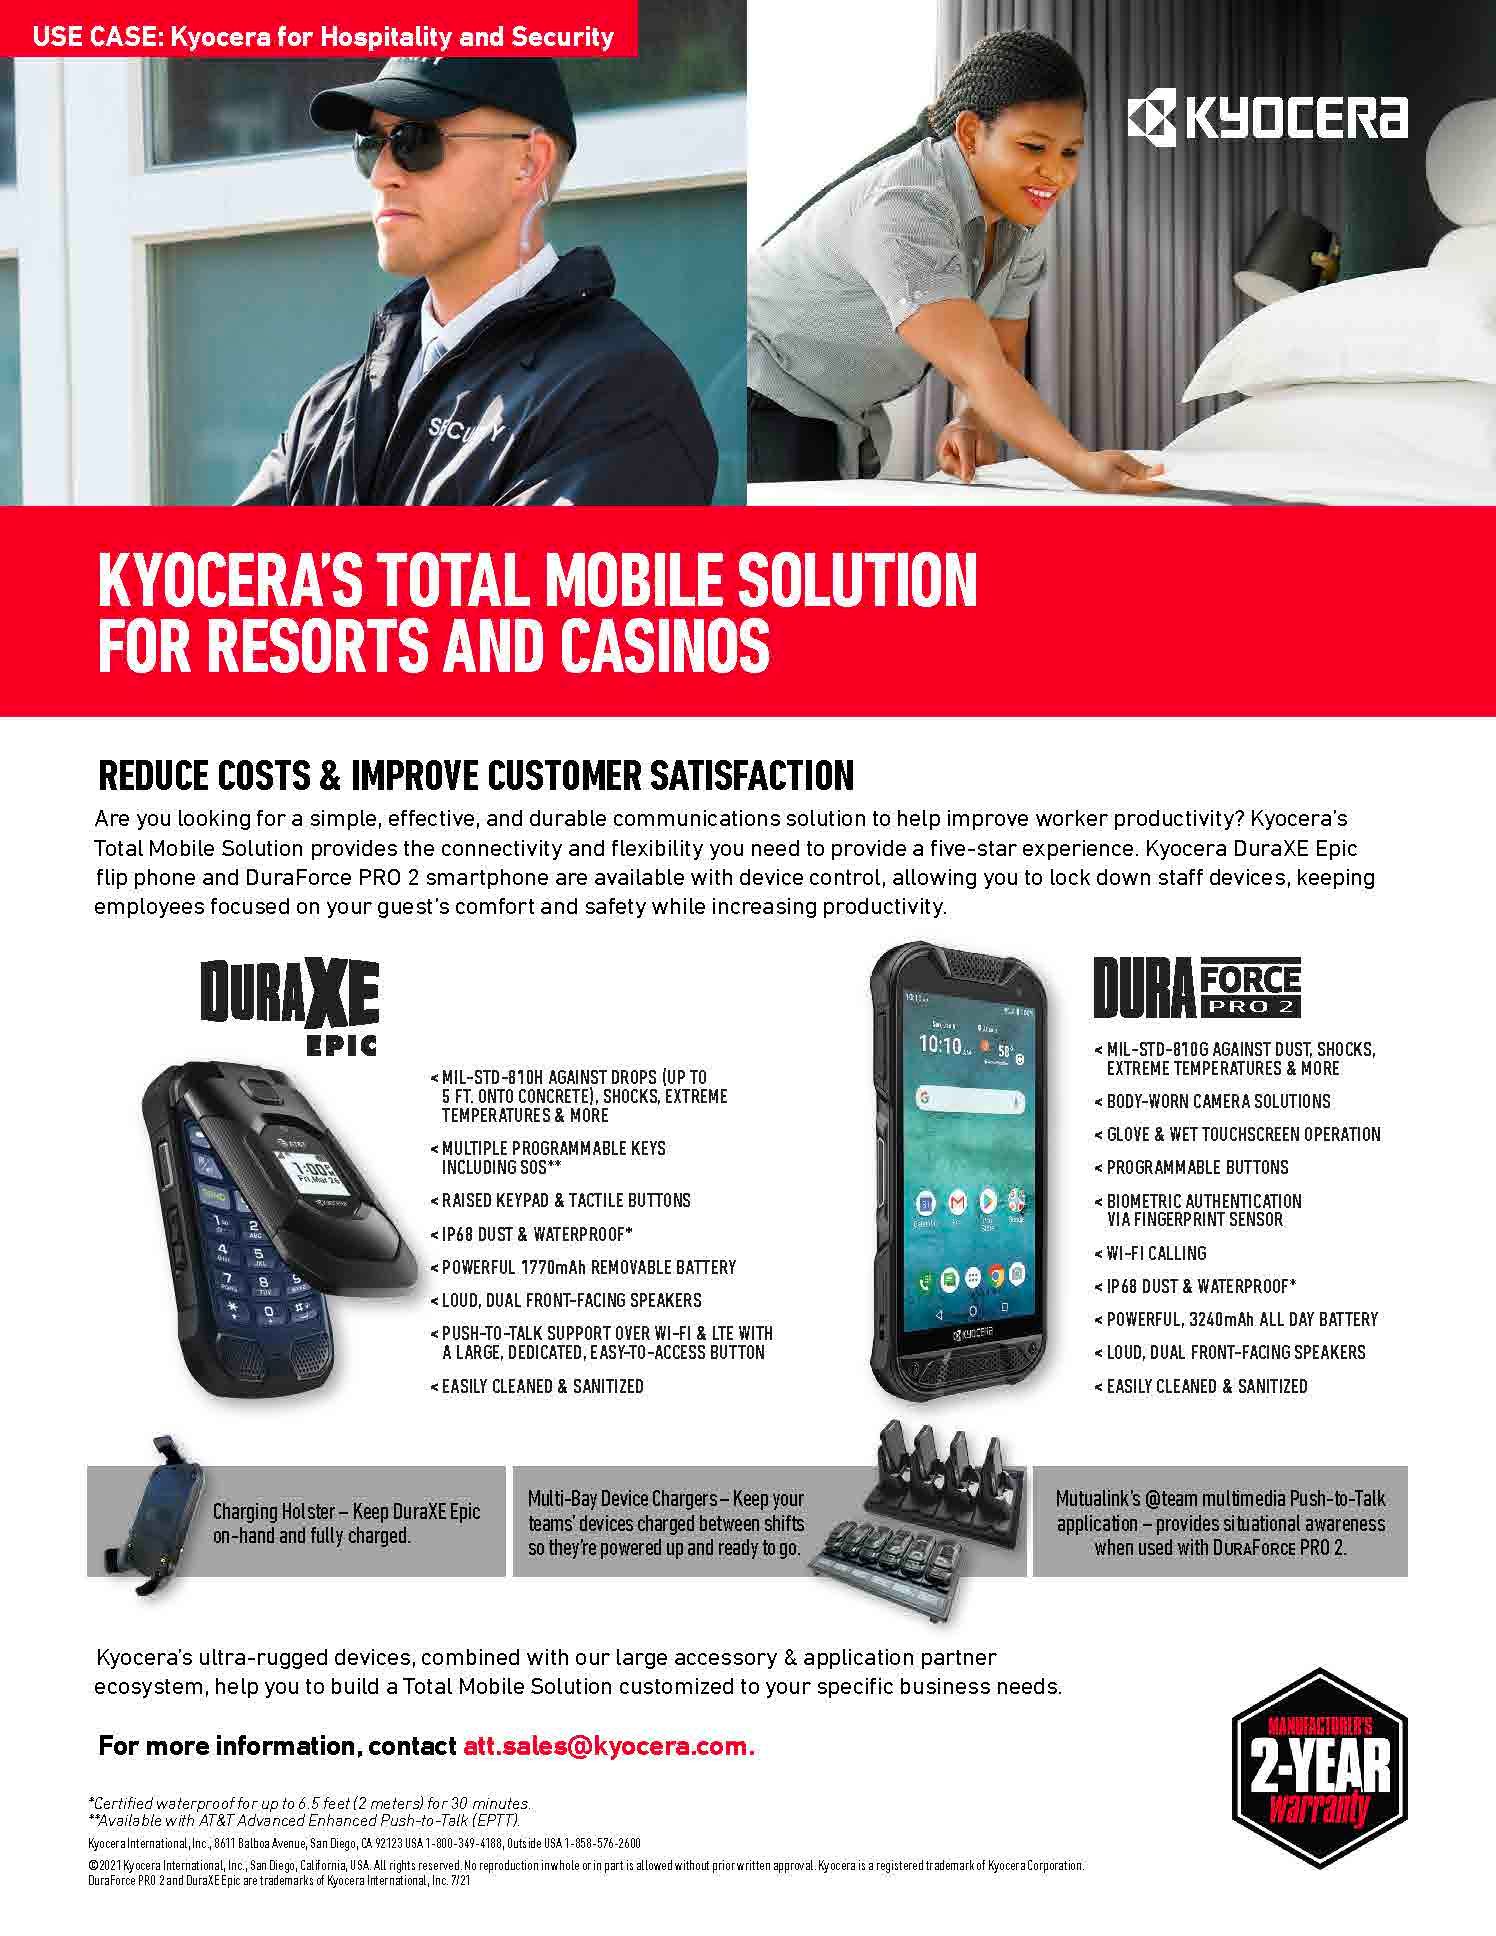 A brochure for kyocera 's total mobile solution for resorts and casinos.